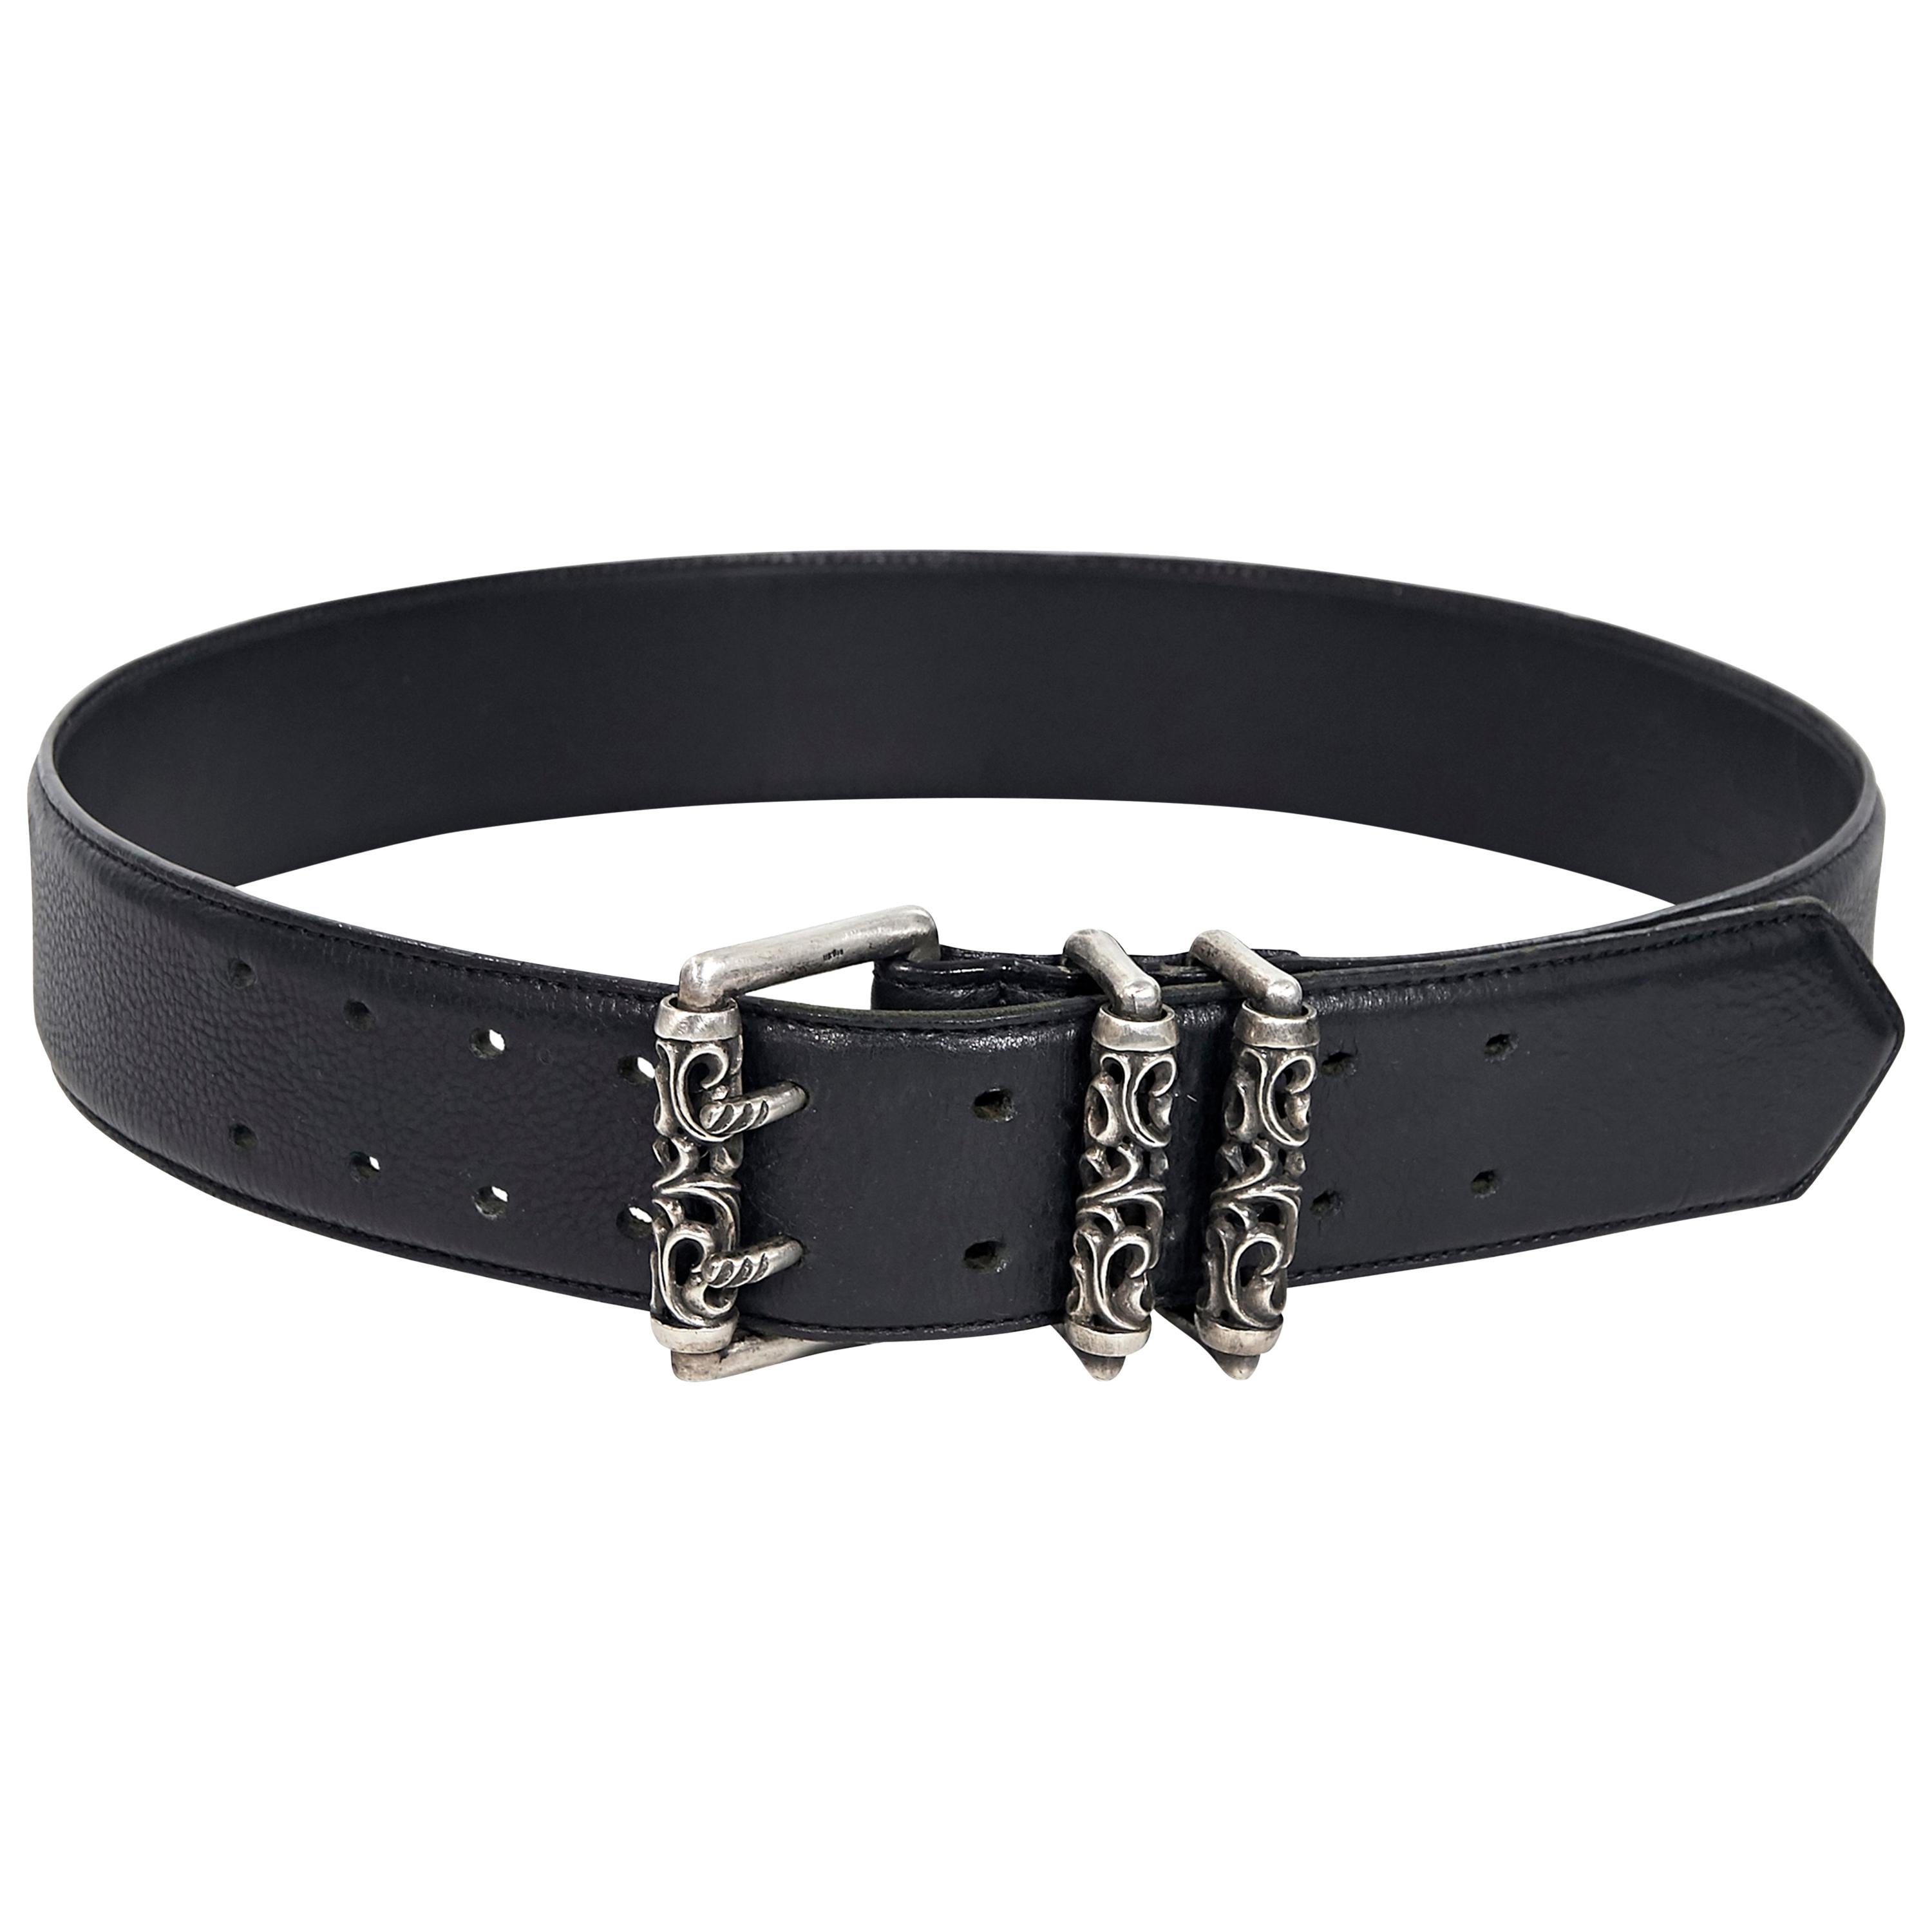 Authentic Chrome Hearts Classic Cross Sterling Buckle Black Leather Belt  Size 36